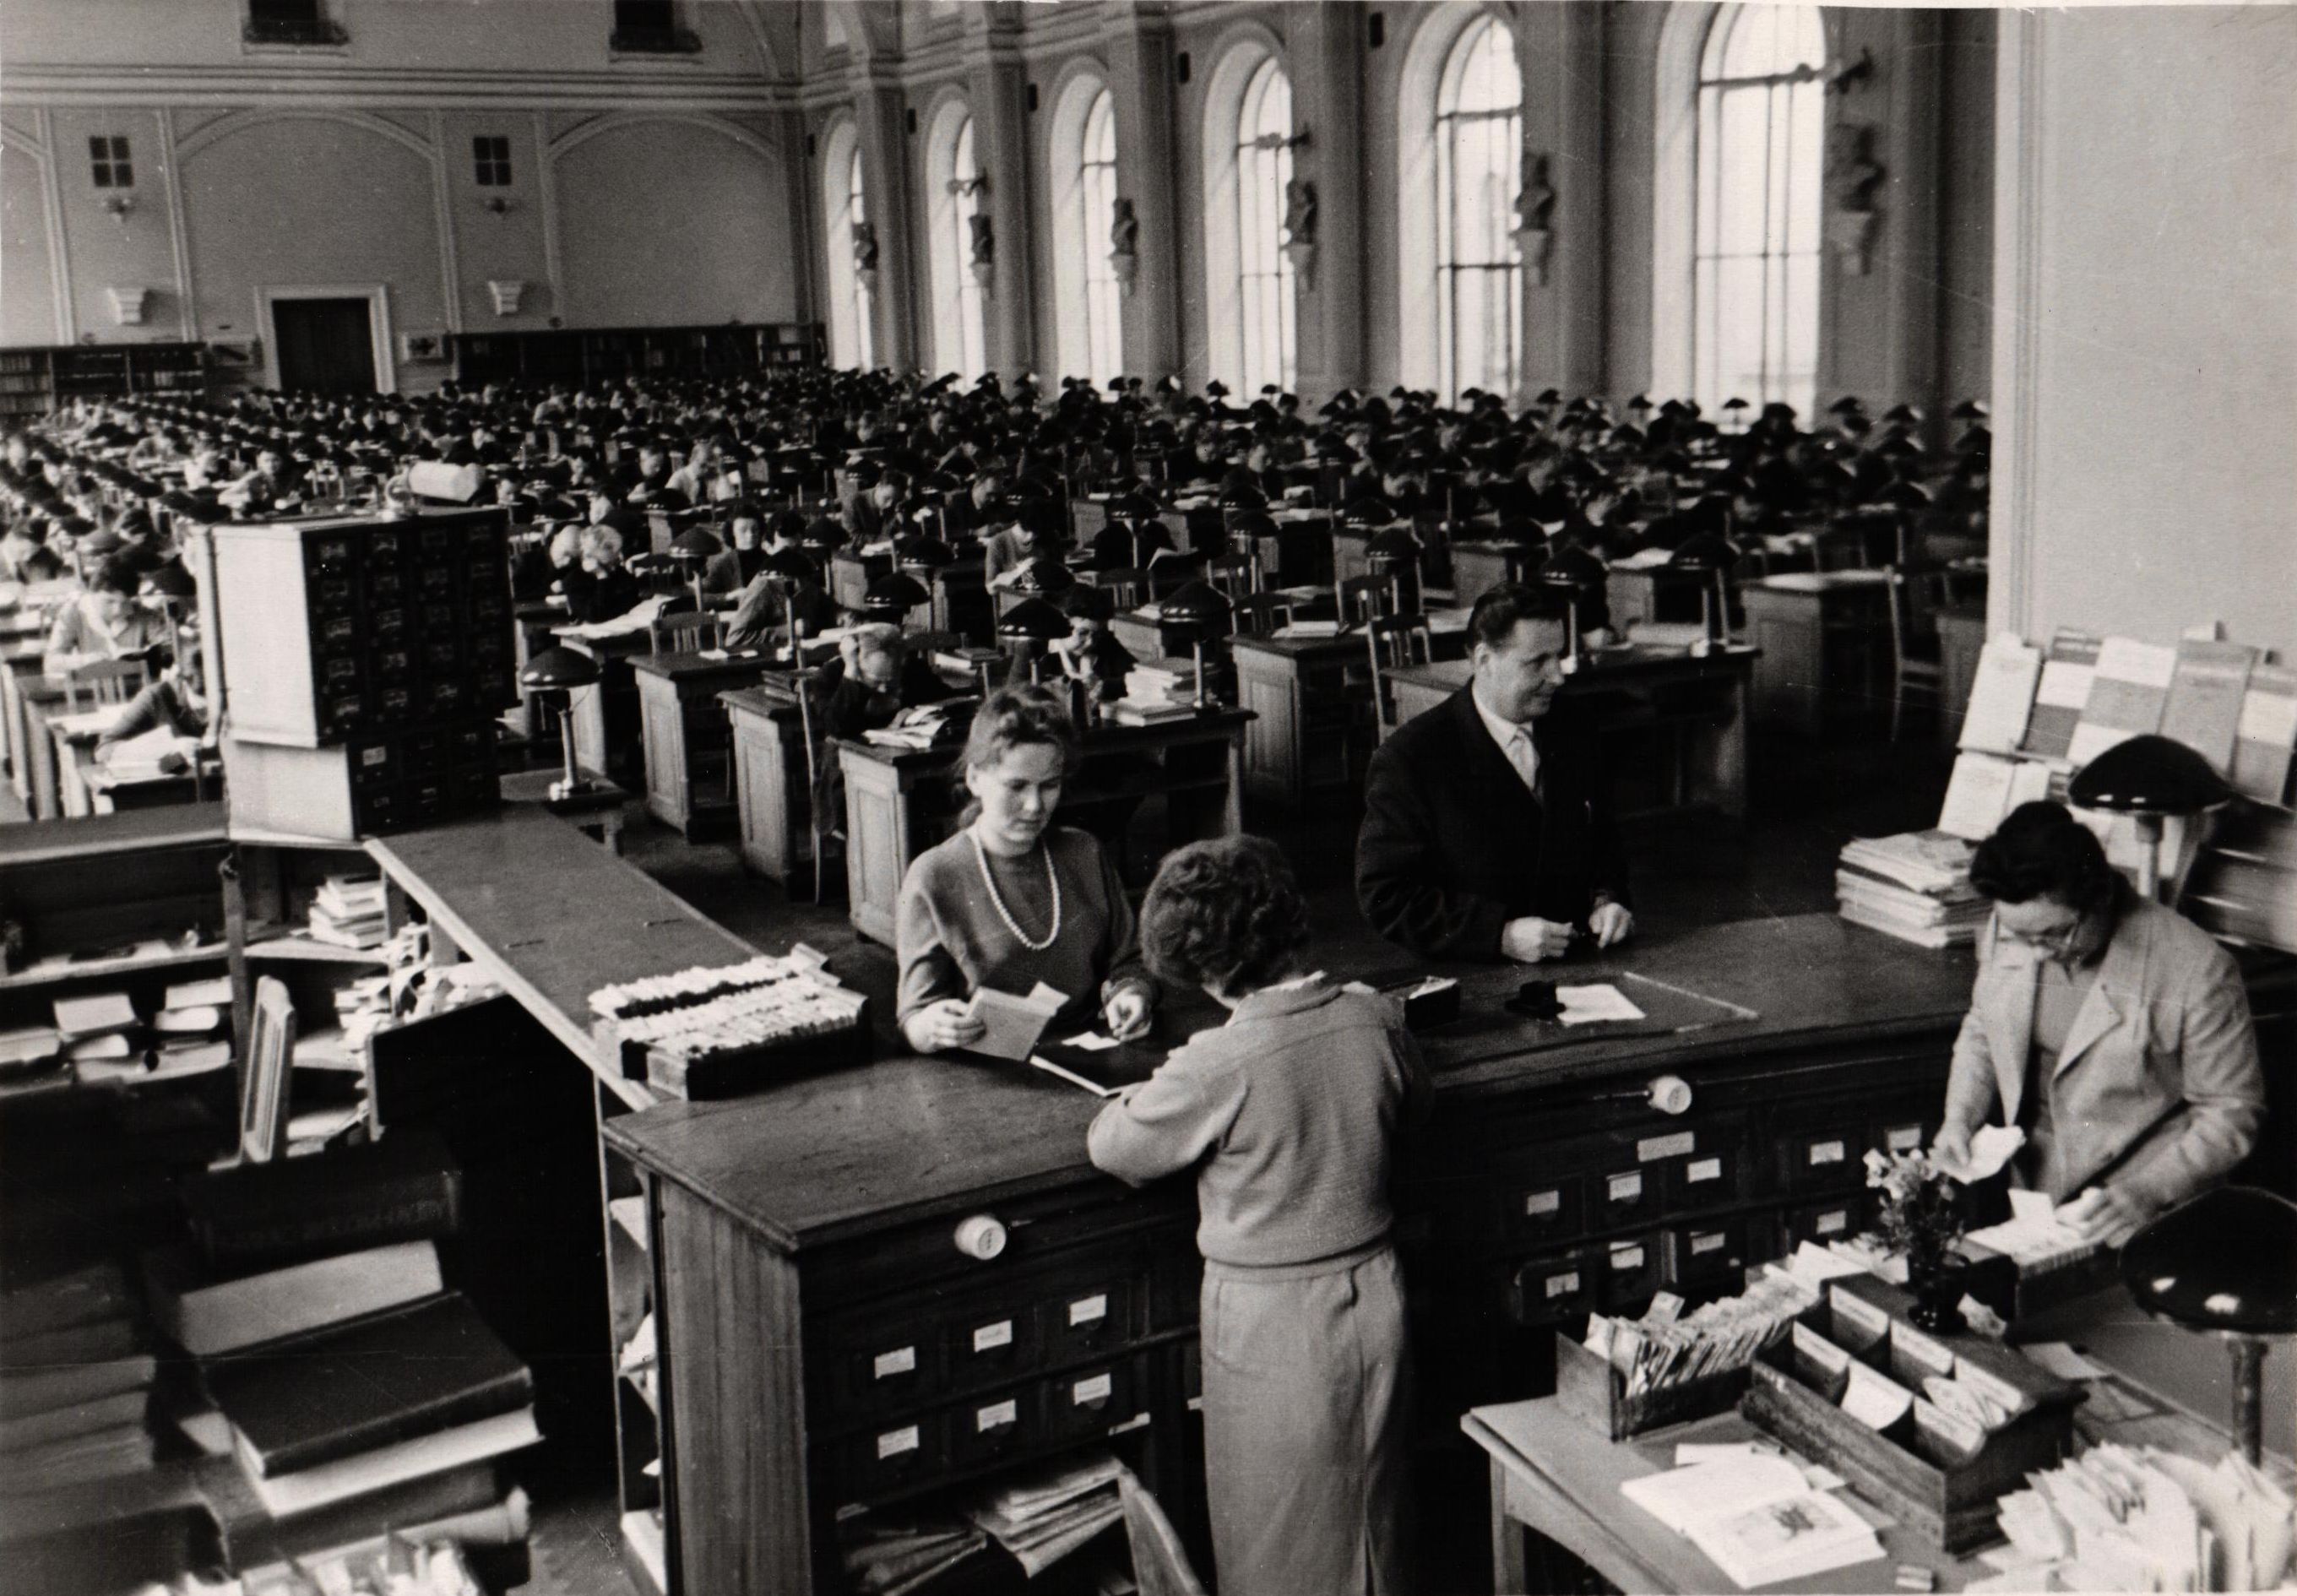 General Reading Room. 1960s